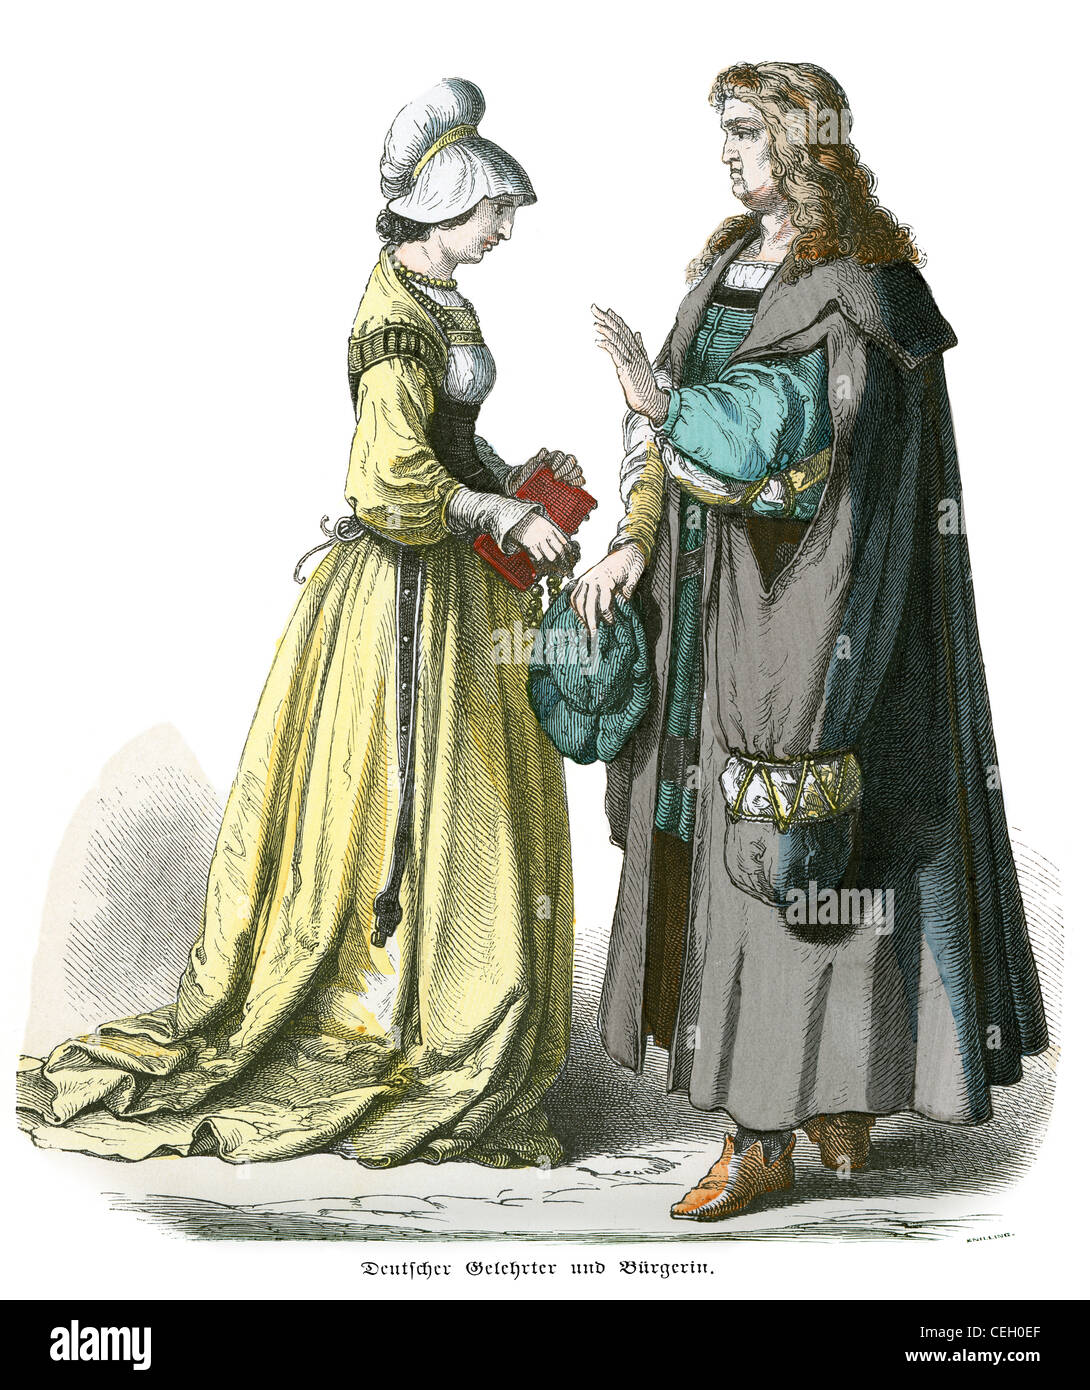 A couple in the fashion of 16th century Germany Stock Photo